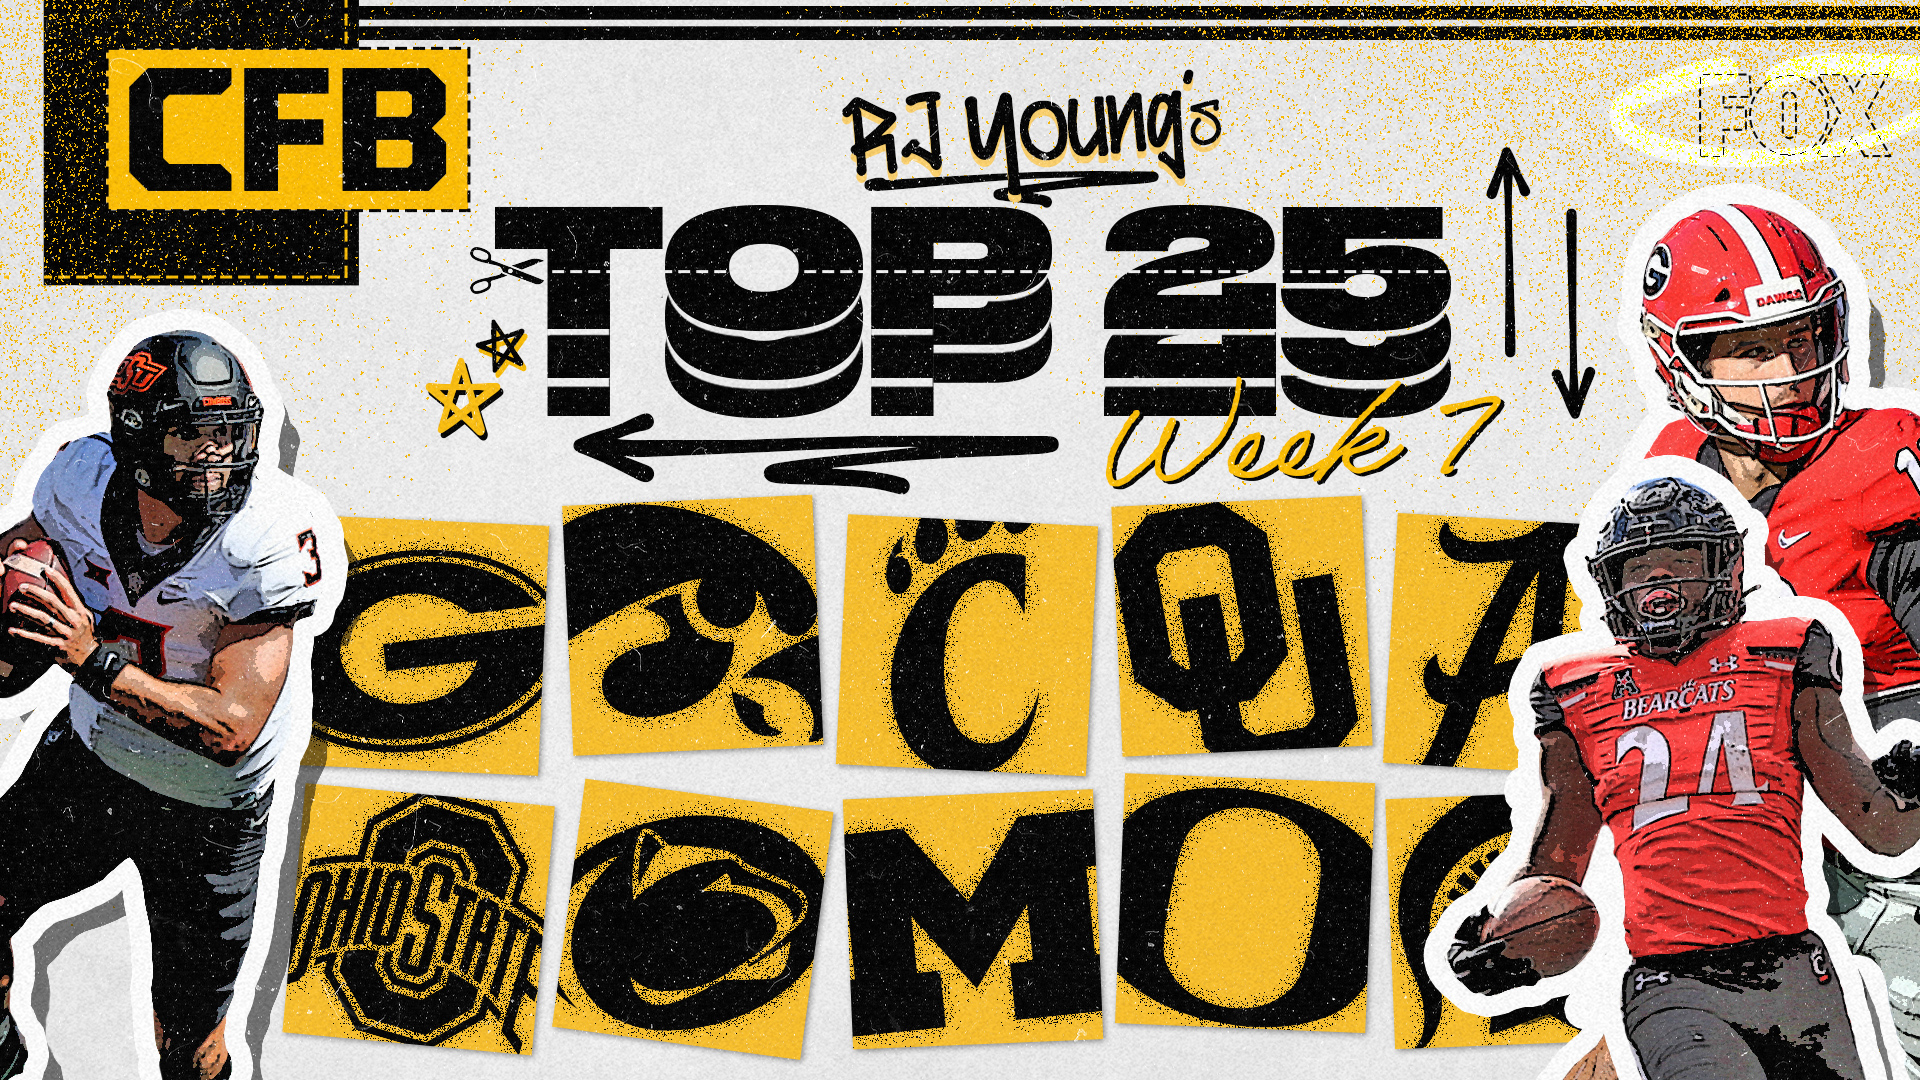 College Football Rankings: Georgia stays No. 1, Iowa falls, Oklahoma State climbs in RJ Young's Top 25